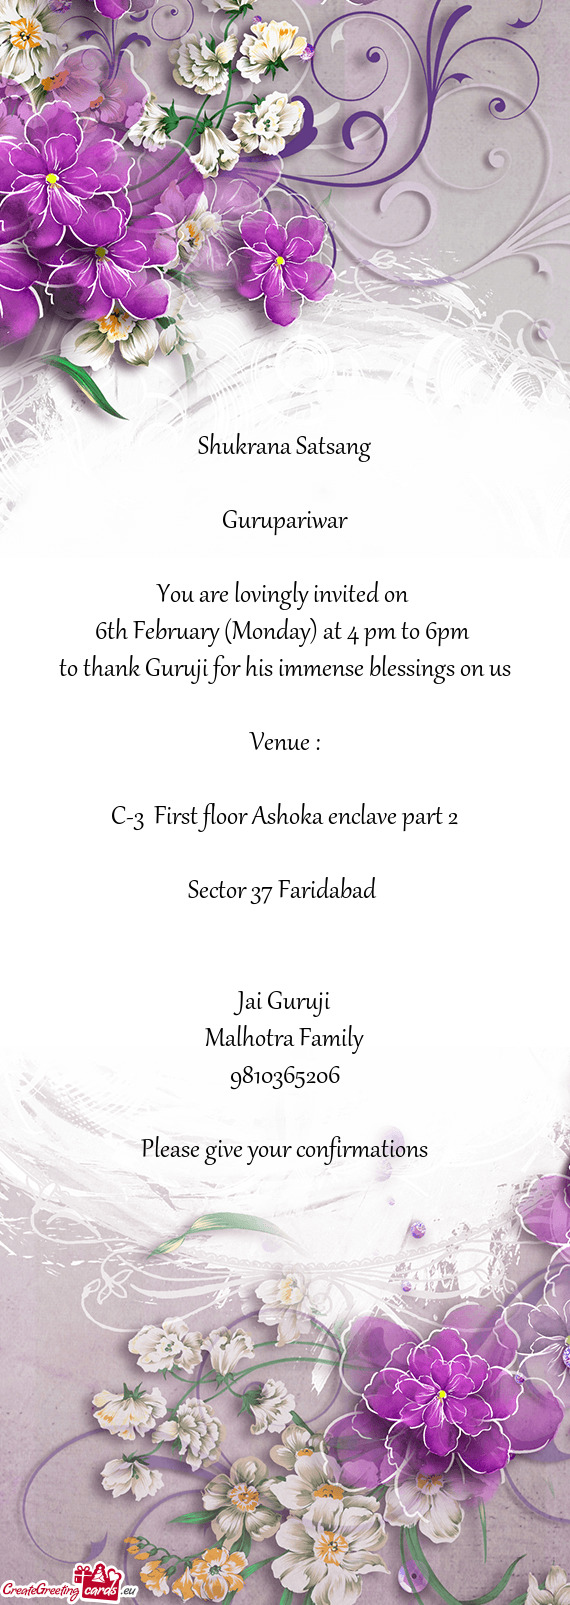 6th February (Monday) at 4 pm to 6pm